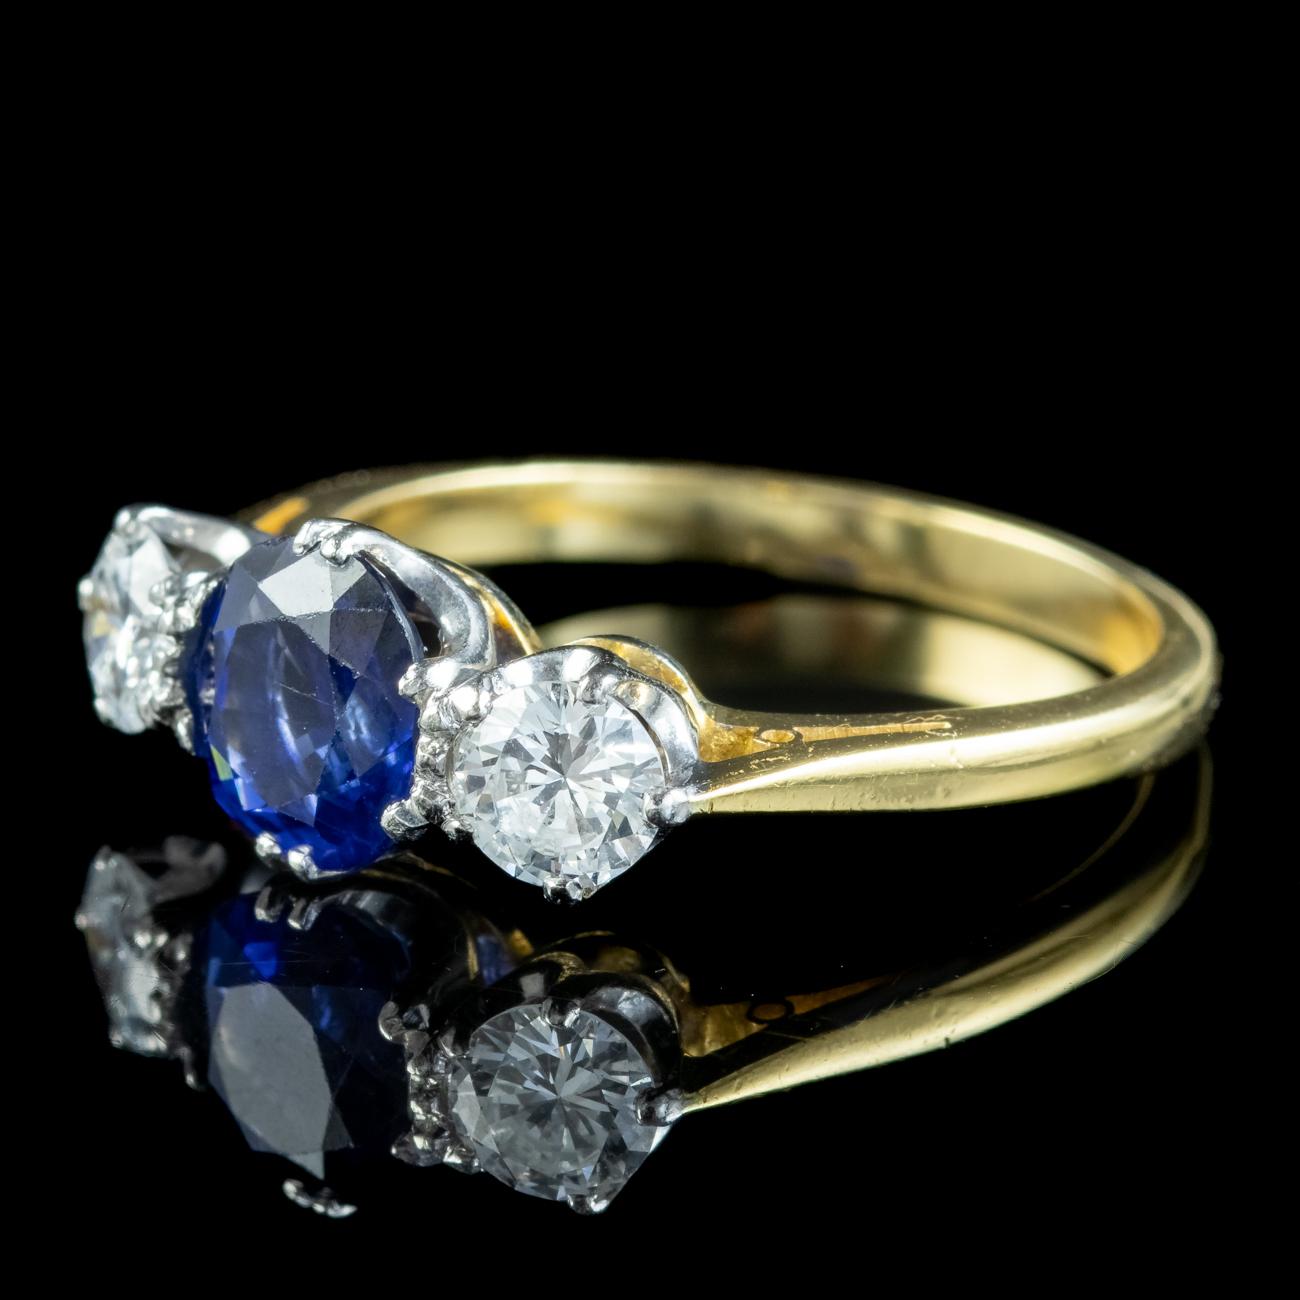 Antique Edwardian Ceylon Sapphire Diamond Trilogy Ring 1.51ct Sapphire With Cert In Good Condition For Sale In Kendal, GB